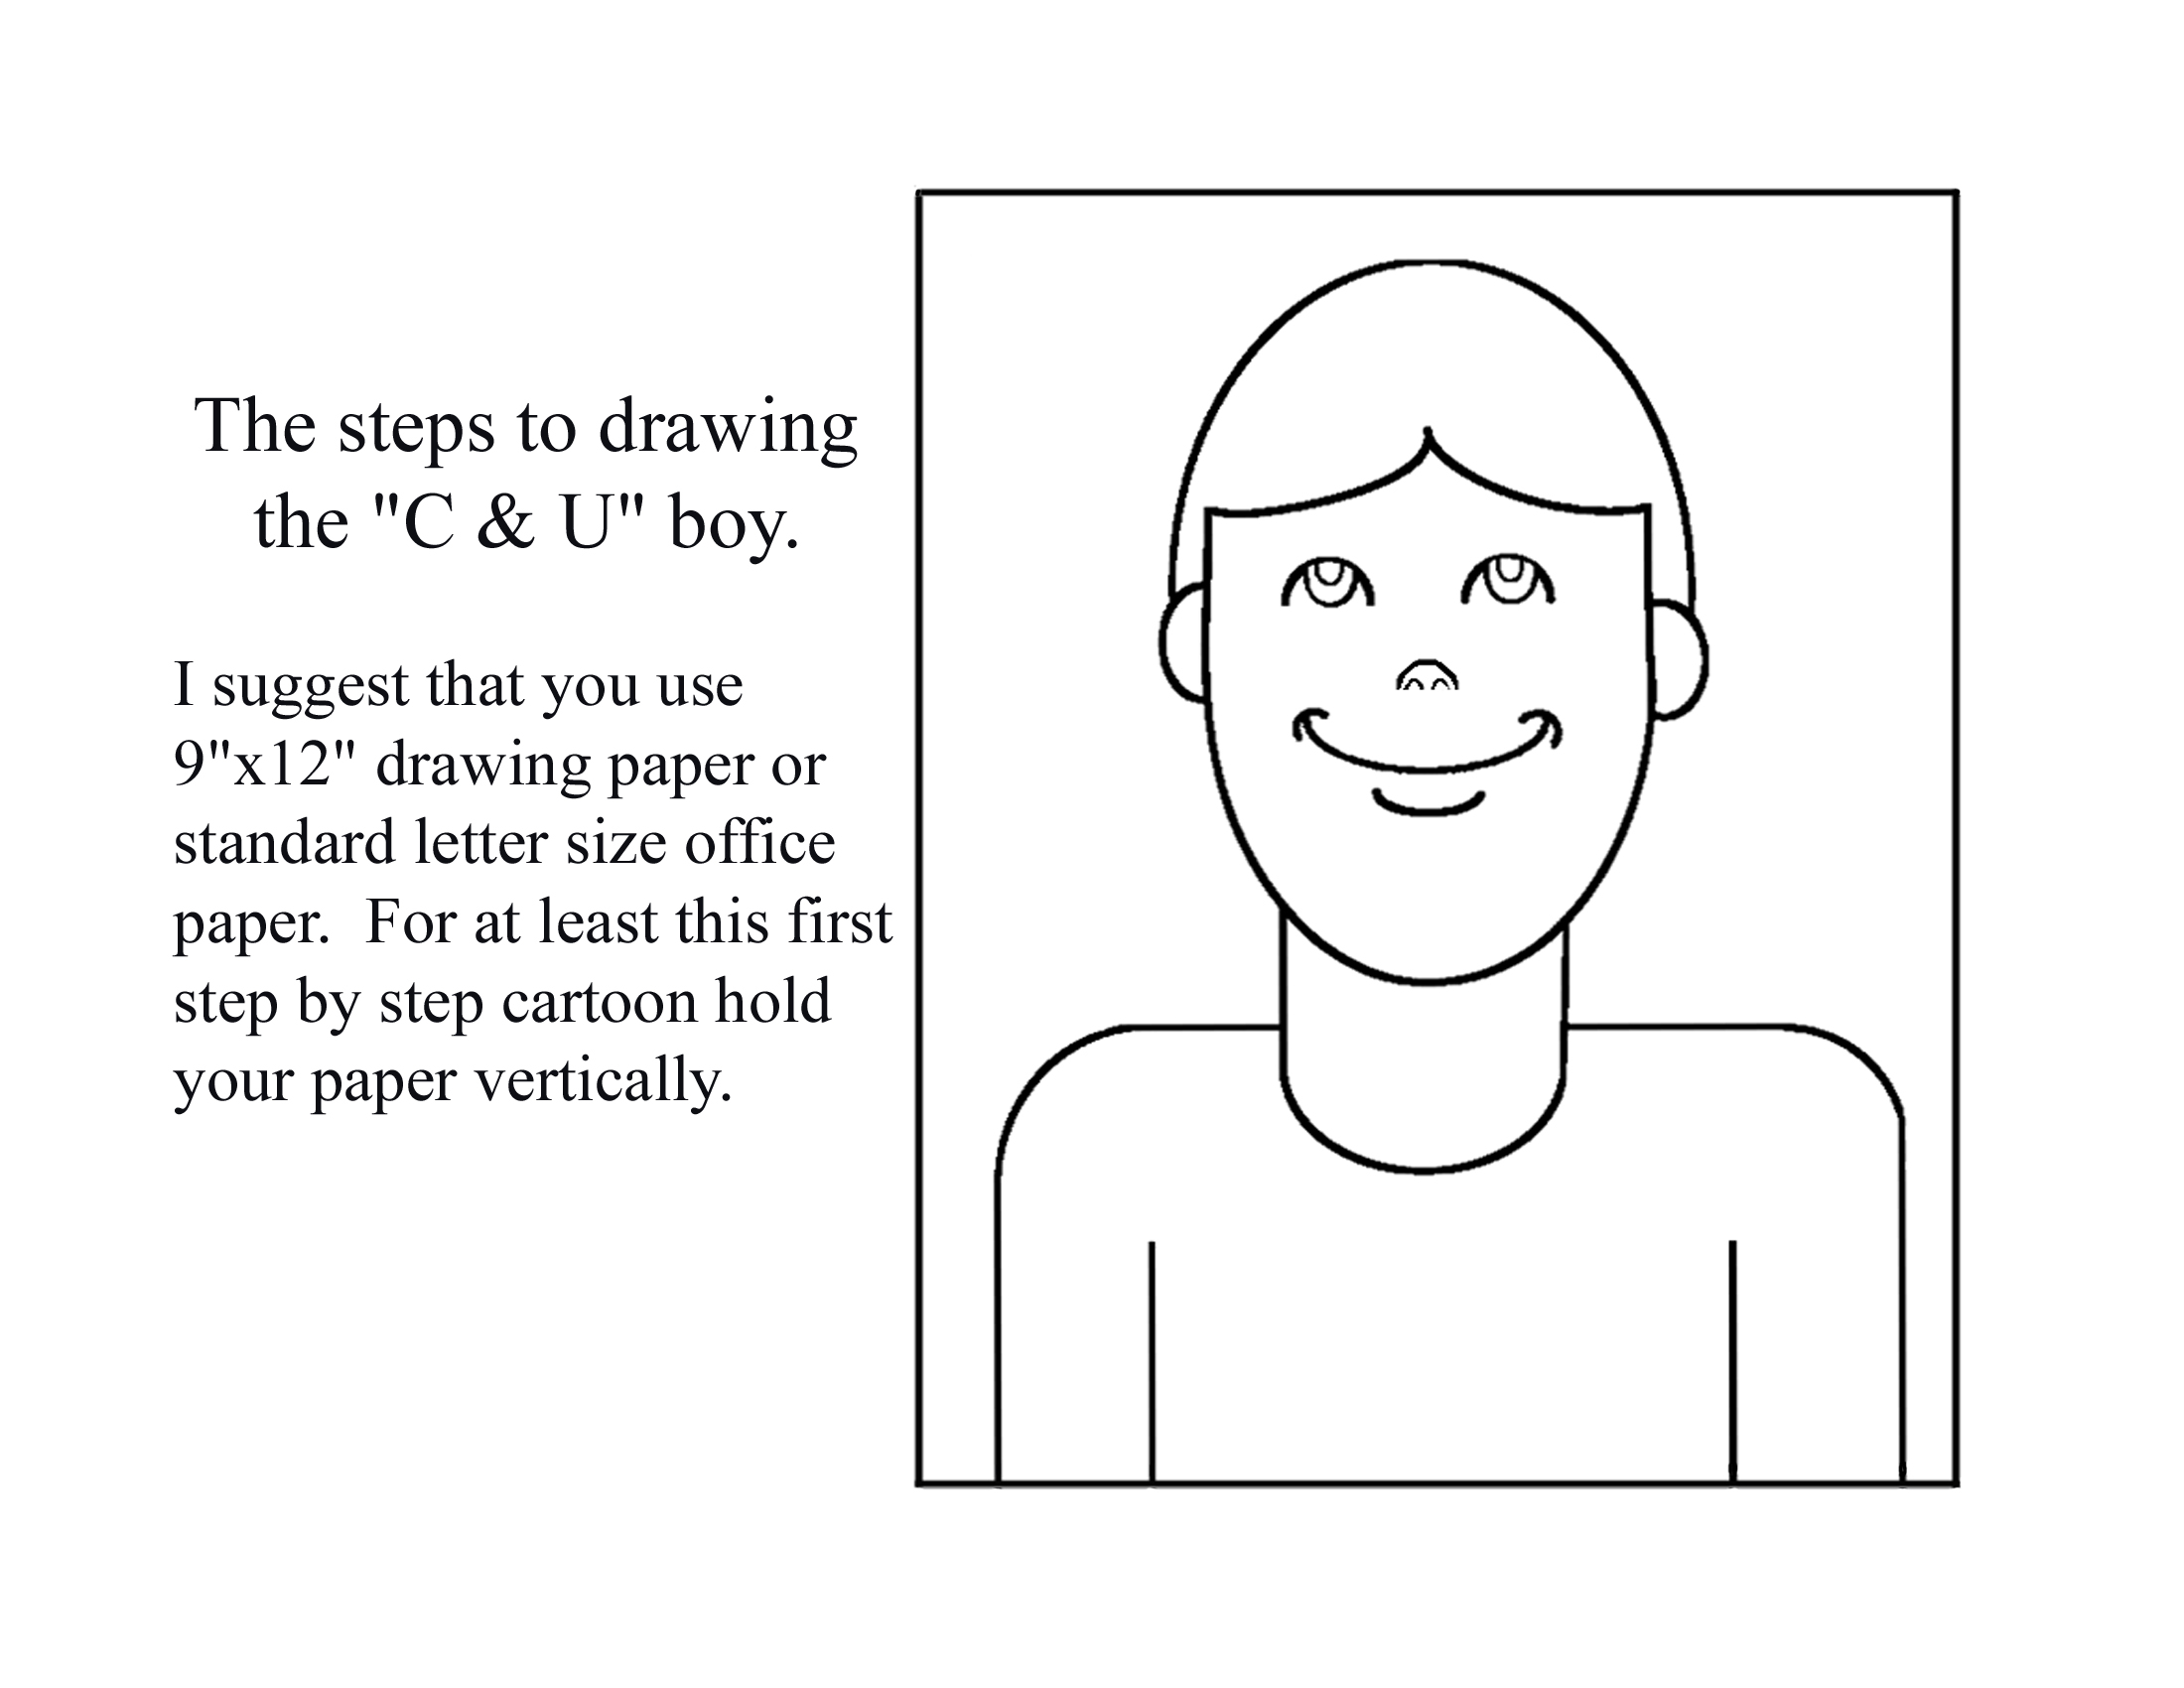 How to draw a letter C and U boy.